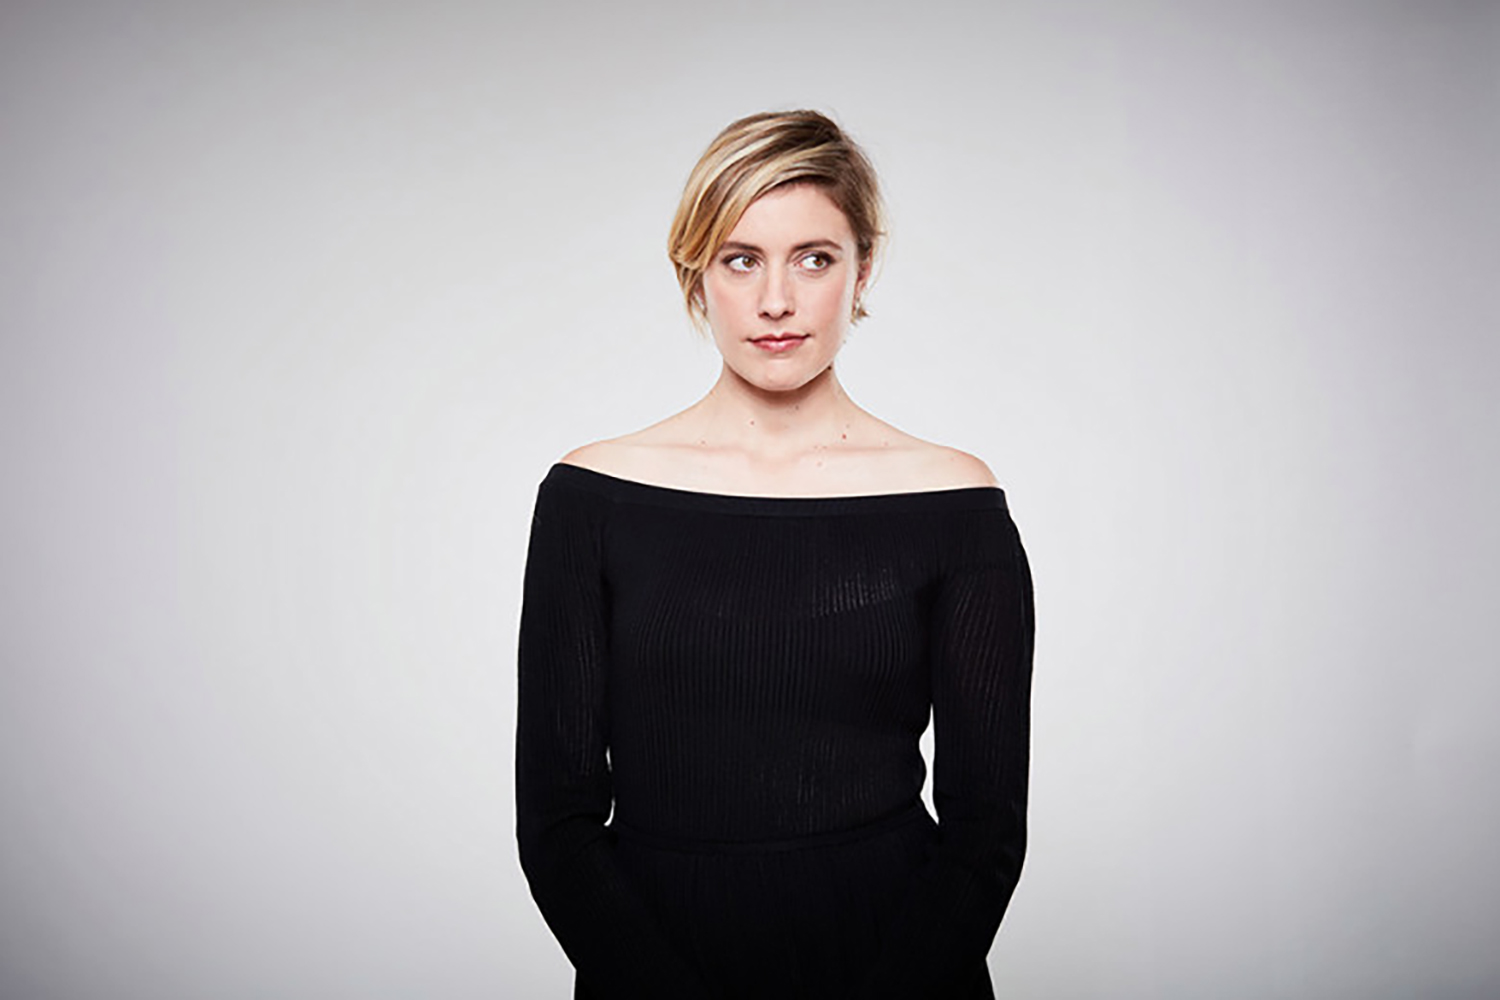 GRETA GERWIG IS THE ICON WE’VE BEEN WAITING FOR